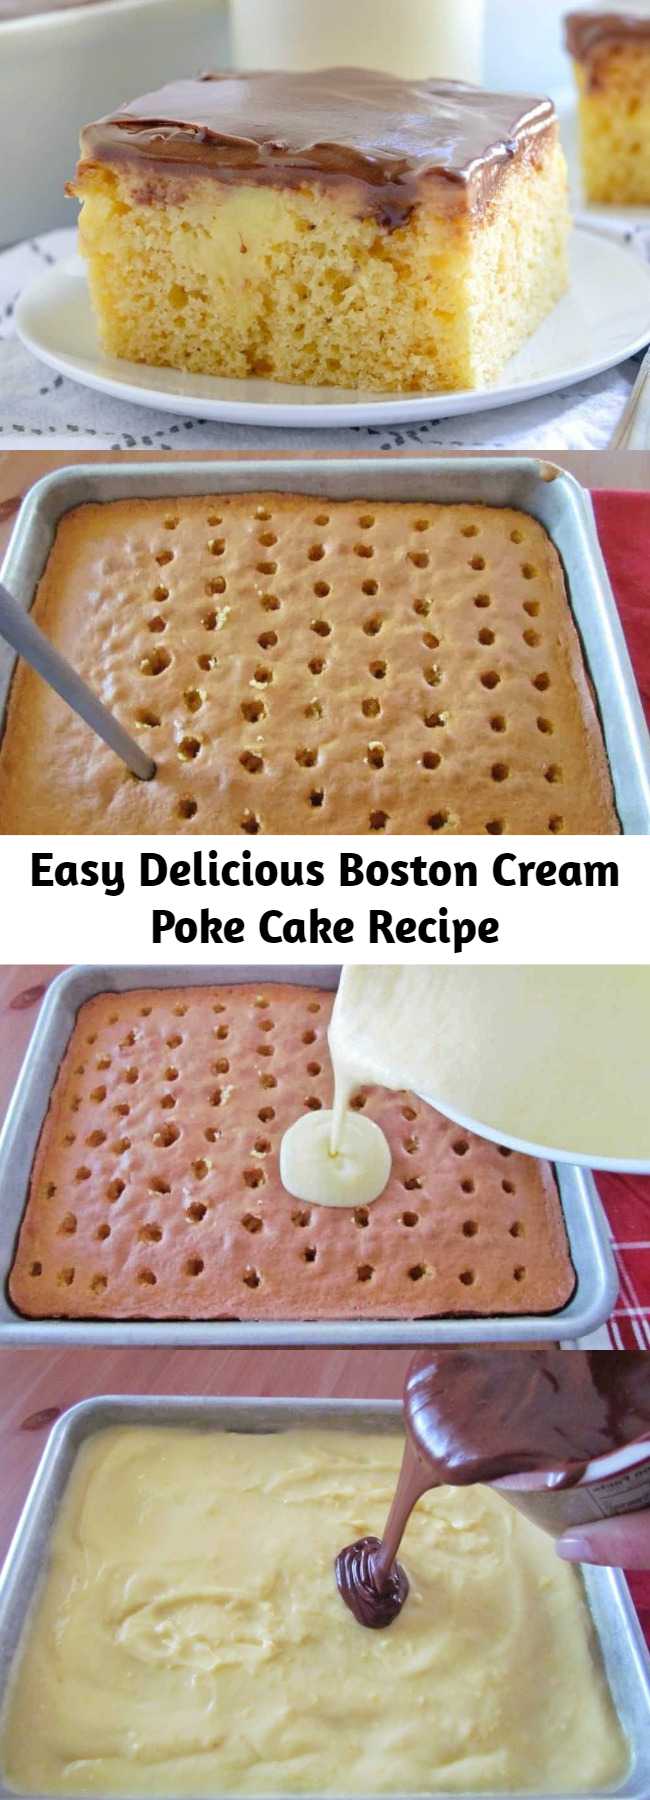 Easy Delicious Boston Cream Poke Cake Recipe - This Boston Cream Poke Cake tastes just like the pie but in cake form! Easily made with a boxed cake mix, pudding and chocolate frosting!